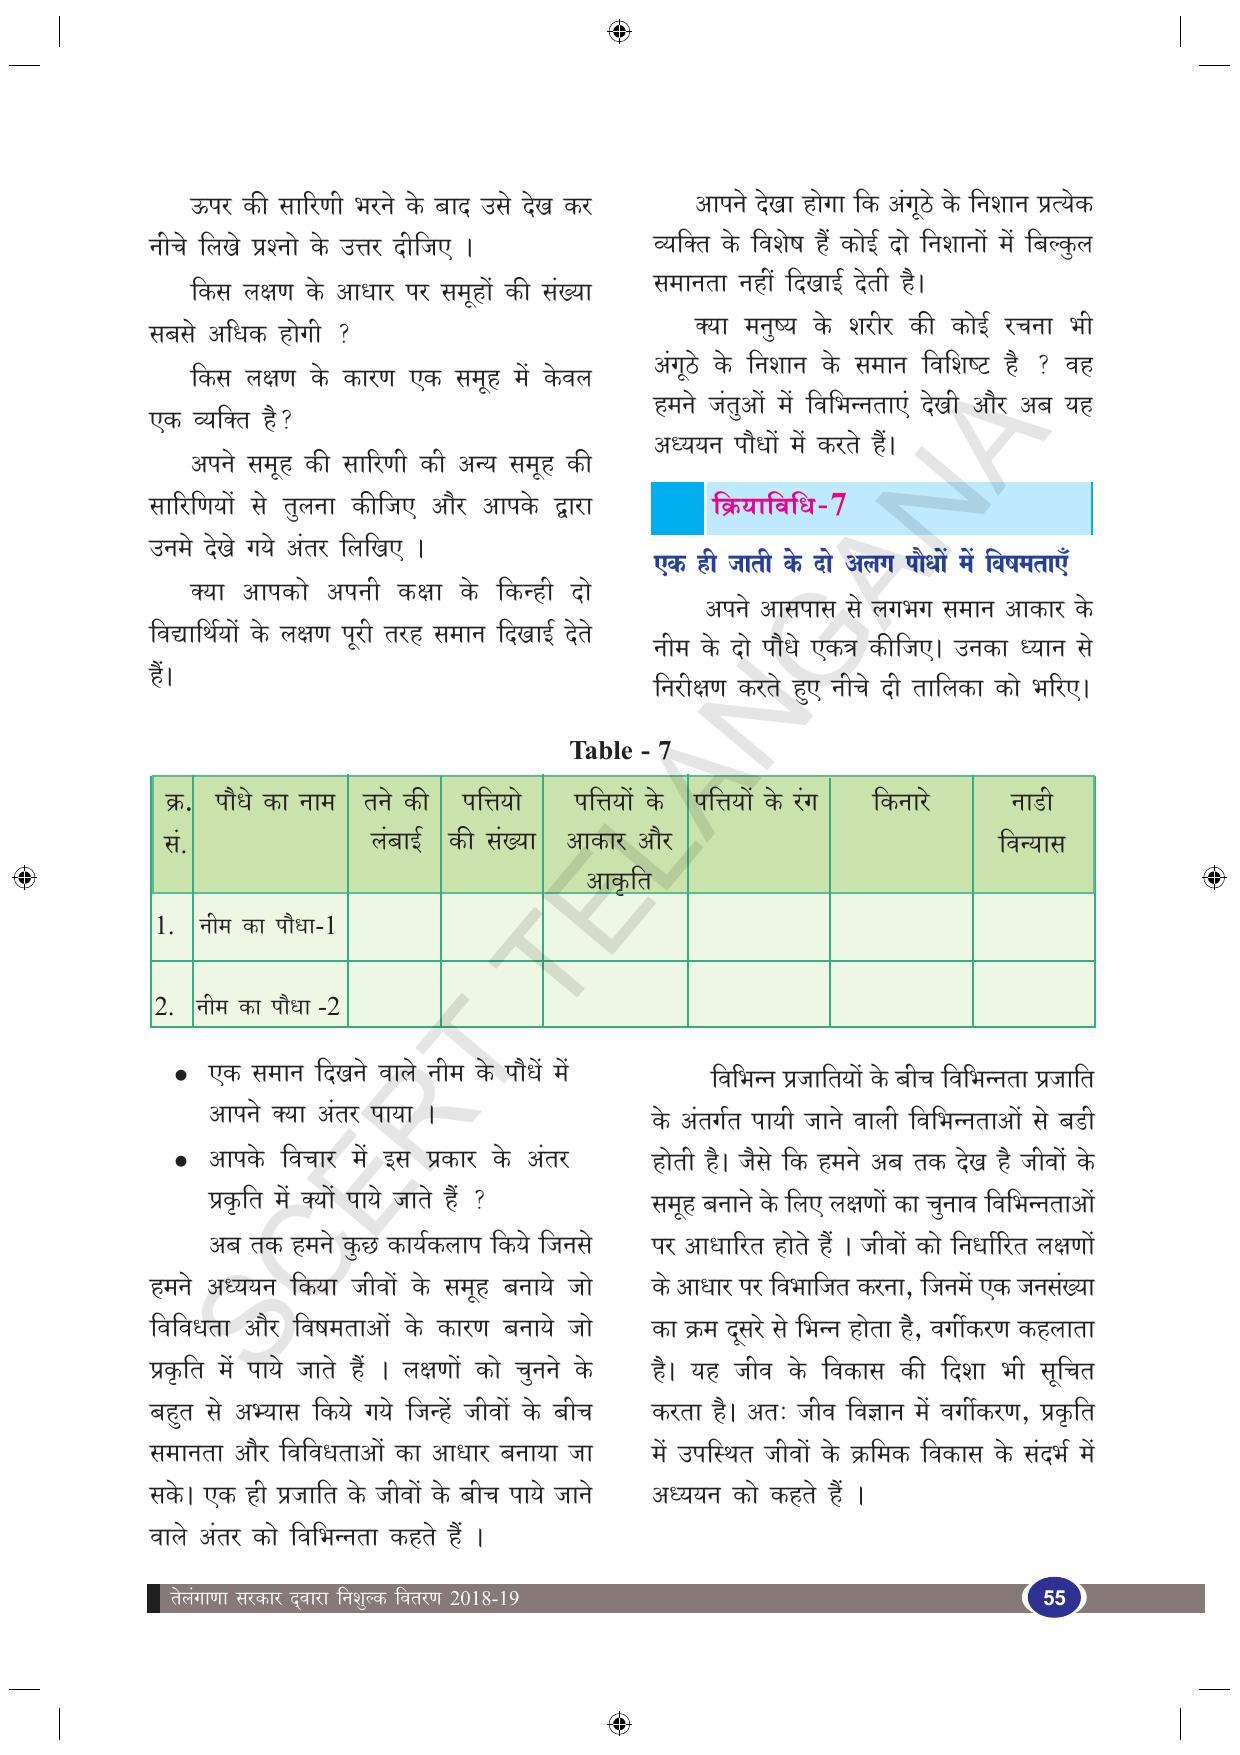 TS SCERT Class 9 Biological Science (Hindi Medium) Text Book - Page 67